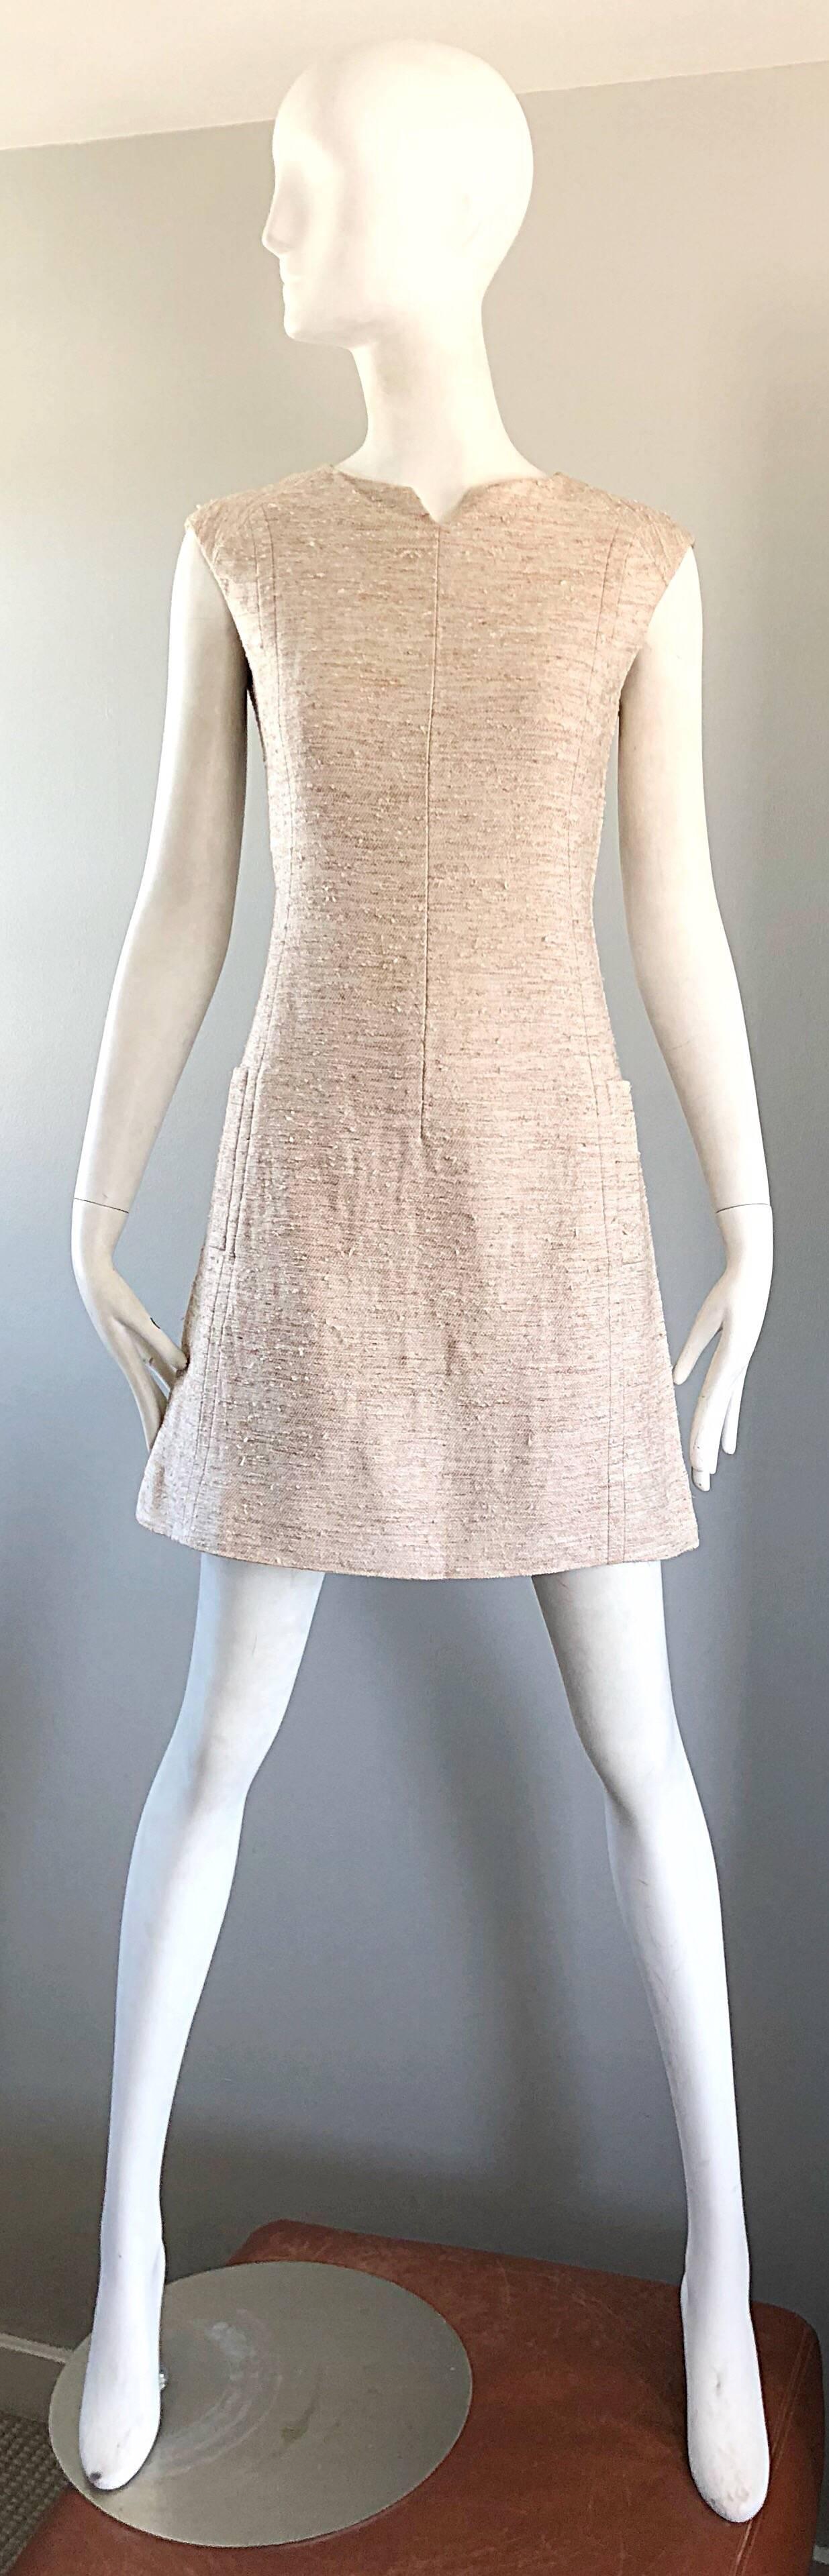 Chic 1960s oatmeal / beige colored Irish Linen A-Line dress! Features a textured tweed-like soft linen. Fitted bodice with a forgiving flattering A Line skirt. Pockets at each side of the waist. Full metal zipper up the back with hook-and-eye